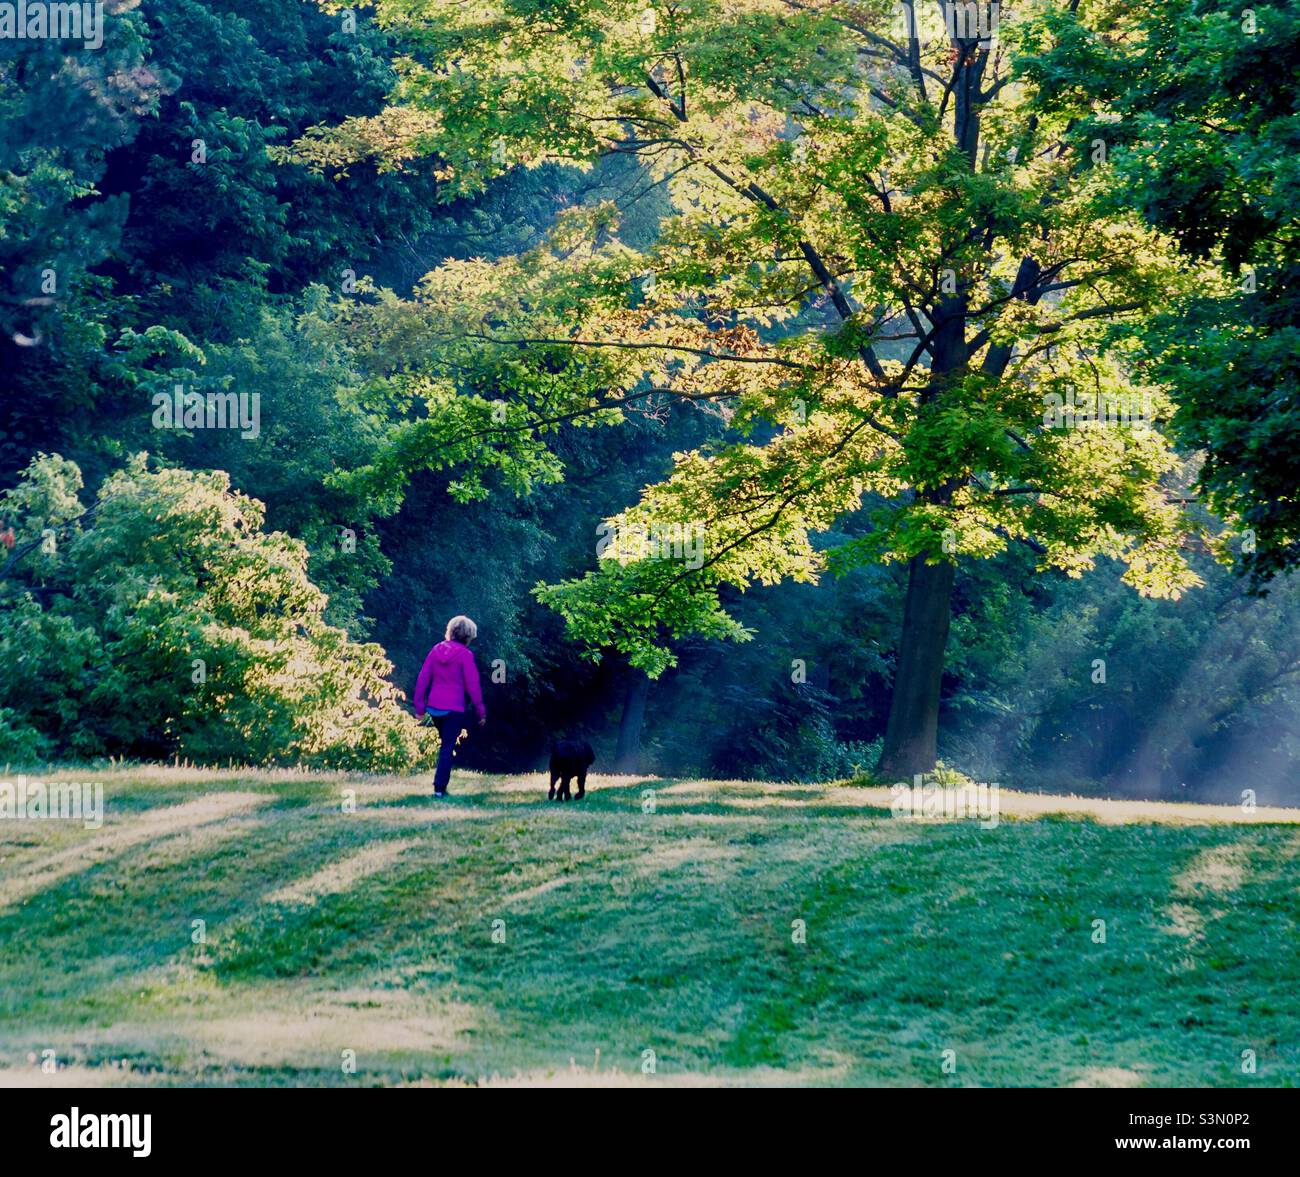 Woman and dog in the park. Early morning on a summer’s day. Shafts of light. Mature trees. Green space. Communing with nature. Stock Photo